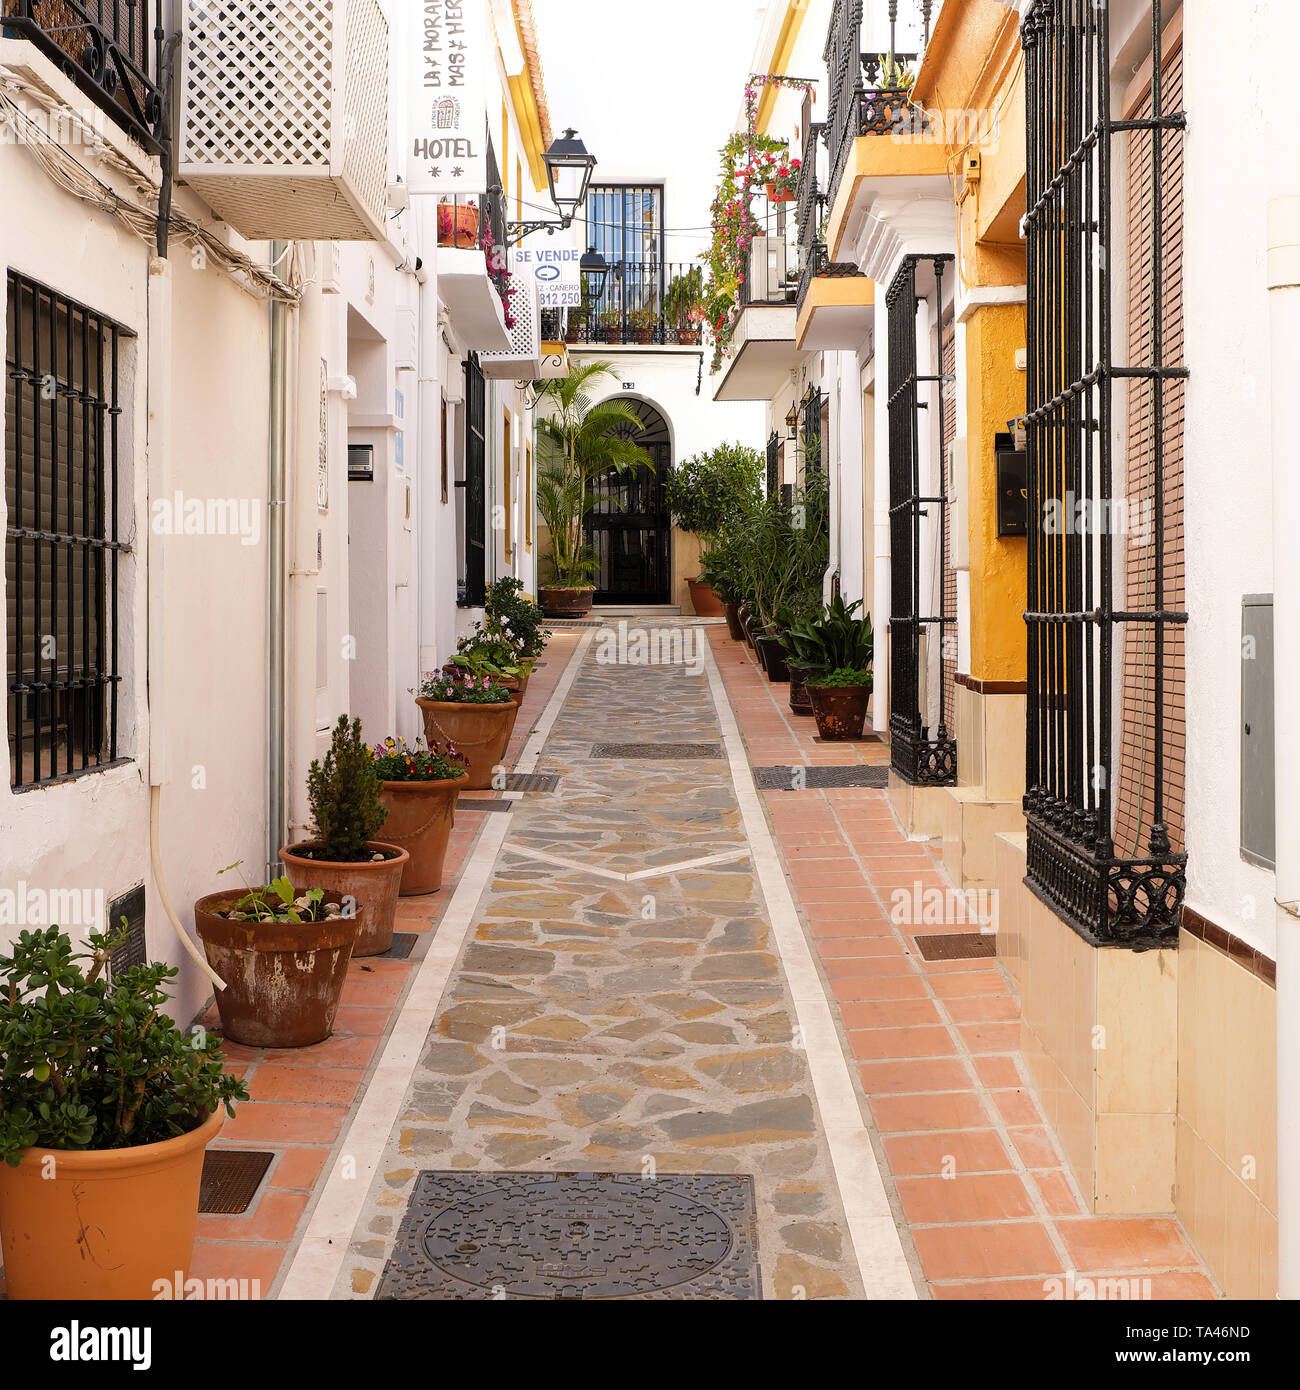 Marbella old town, Andalucia, Spain - March 13, 2019 : traditional whitewashed village houses and narrow street Stock Photo